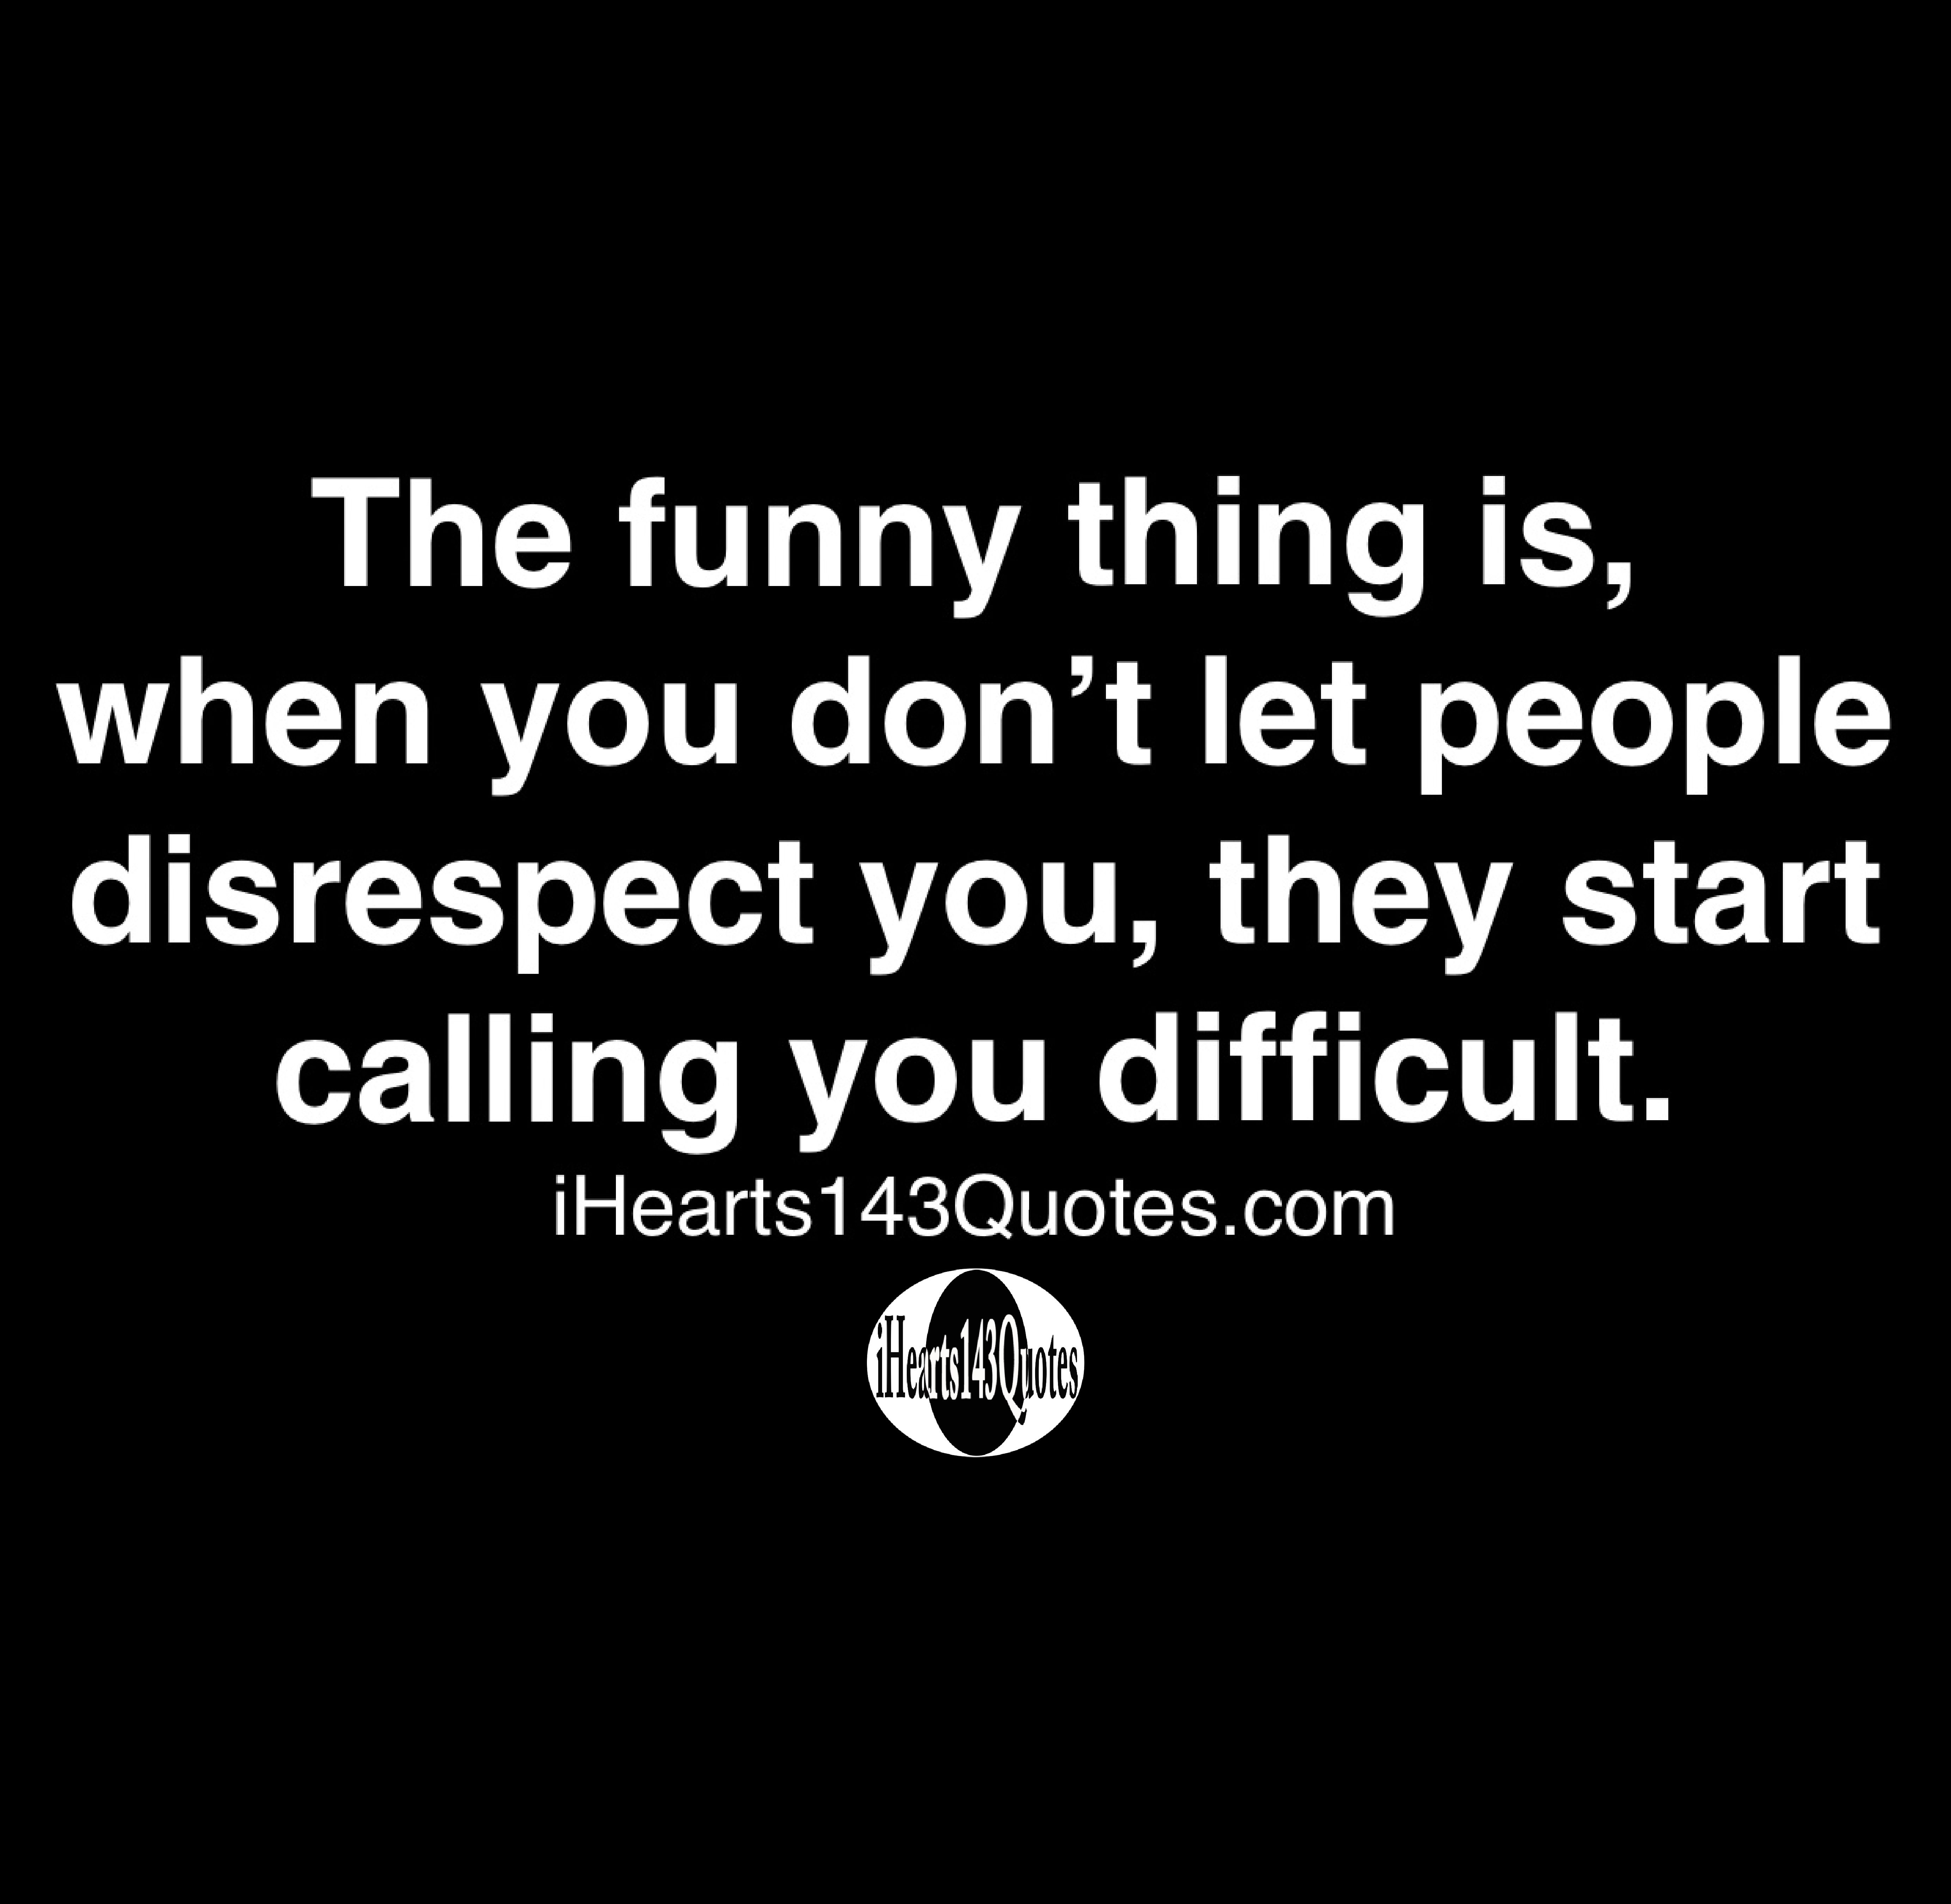 The funny thing is, when you don't let people disrespect you, they start  calling you difficult - Quotes - iHearts143Quotes